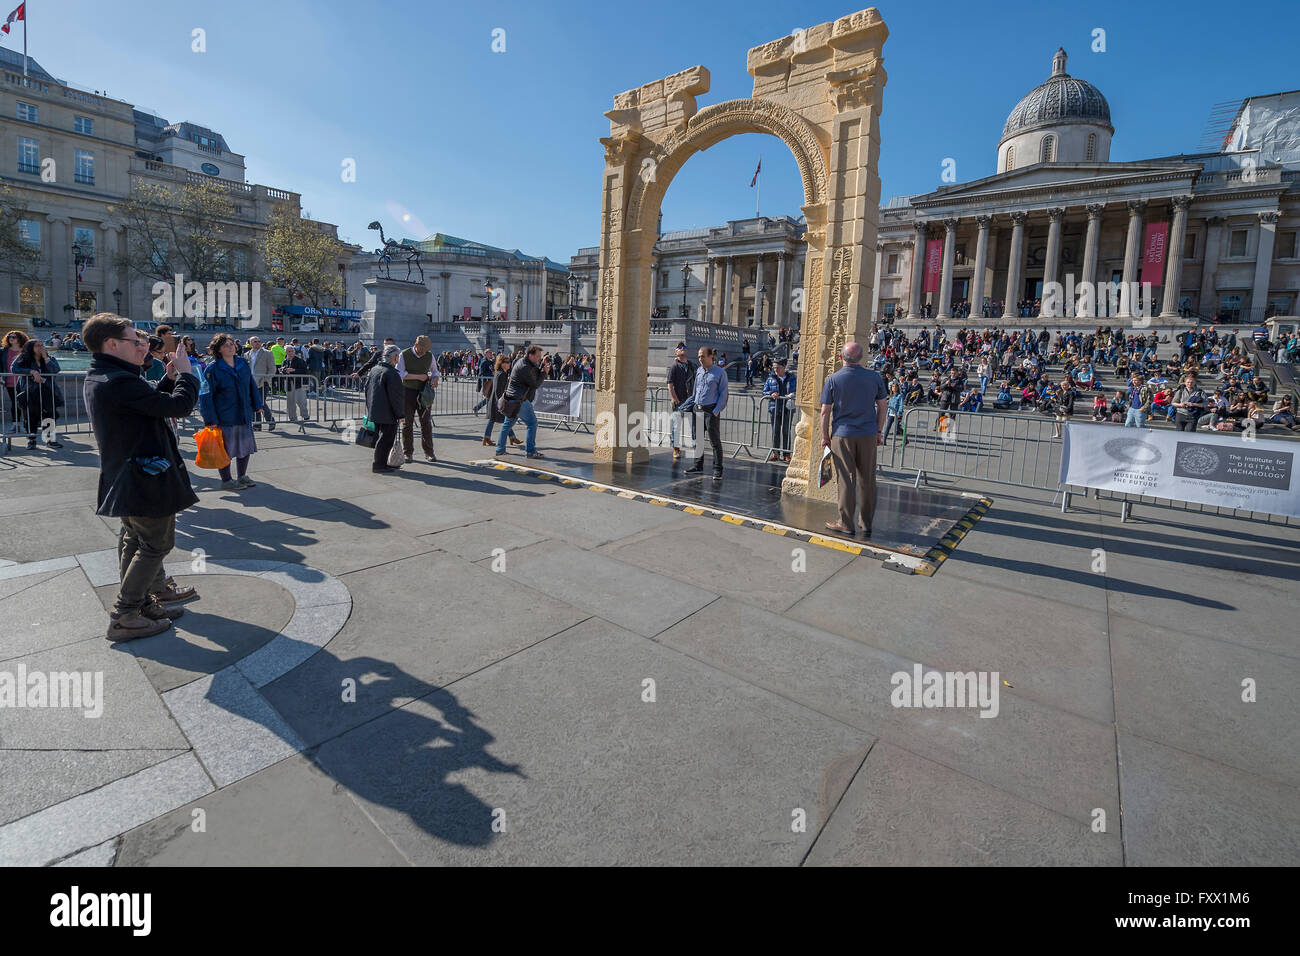 London, UK. 19th April, 2016. Arch of Triumph - A replica of a Syrian monument, two millennia old and destroyed by so-called Islamic State in Syria, has been erected in London's Trafalgar Square. The scale model of the Arch of Triumph has been made from Egyptian marble by the Institute of Digital Archaeology (IDA) using 3D technology, based on photographs of the original arch. The original arch was built by the Romans. The two-thirds scale model will be on display at Trafalgar Square for three days before moving to other locations around the world, Credit:  Guy Bell/Alamy Live News Stock Photo